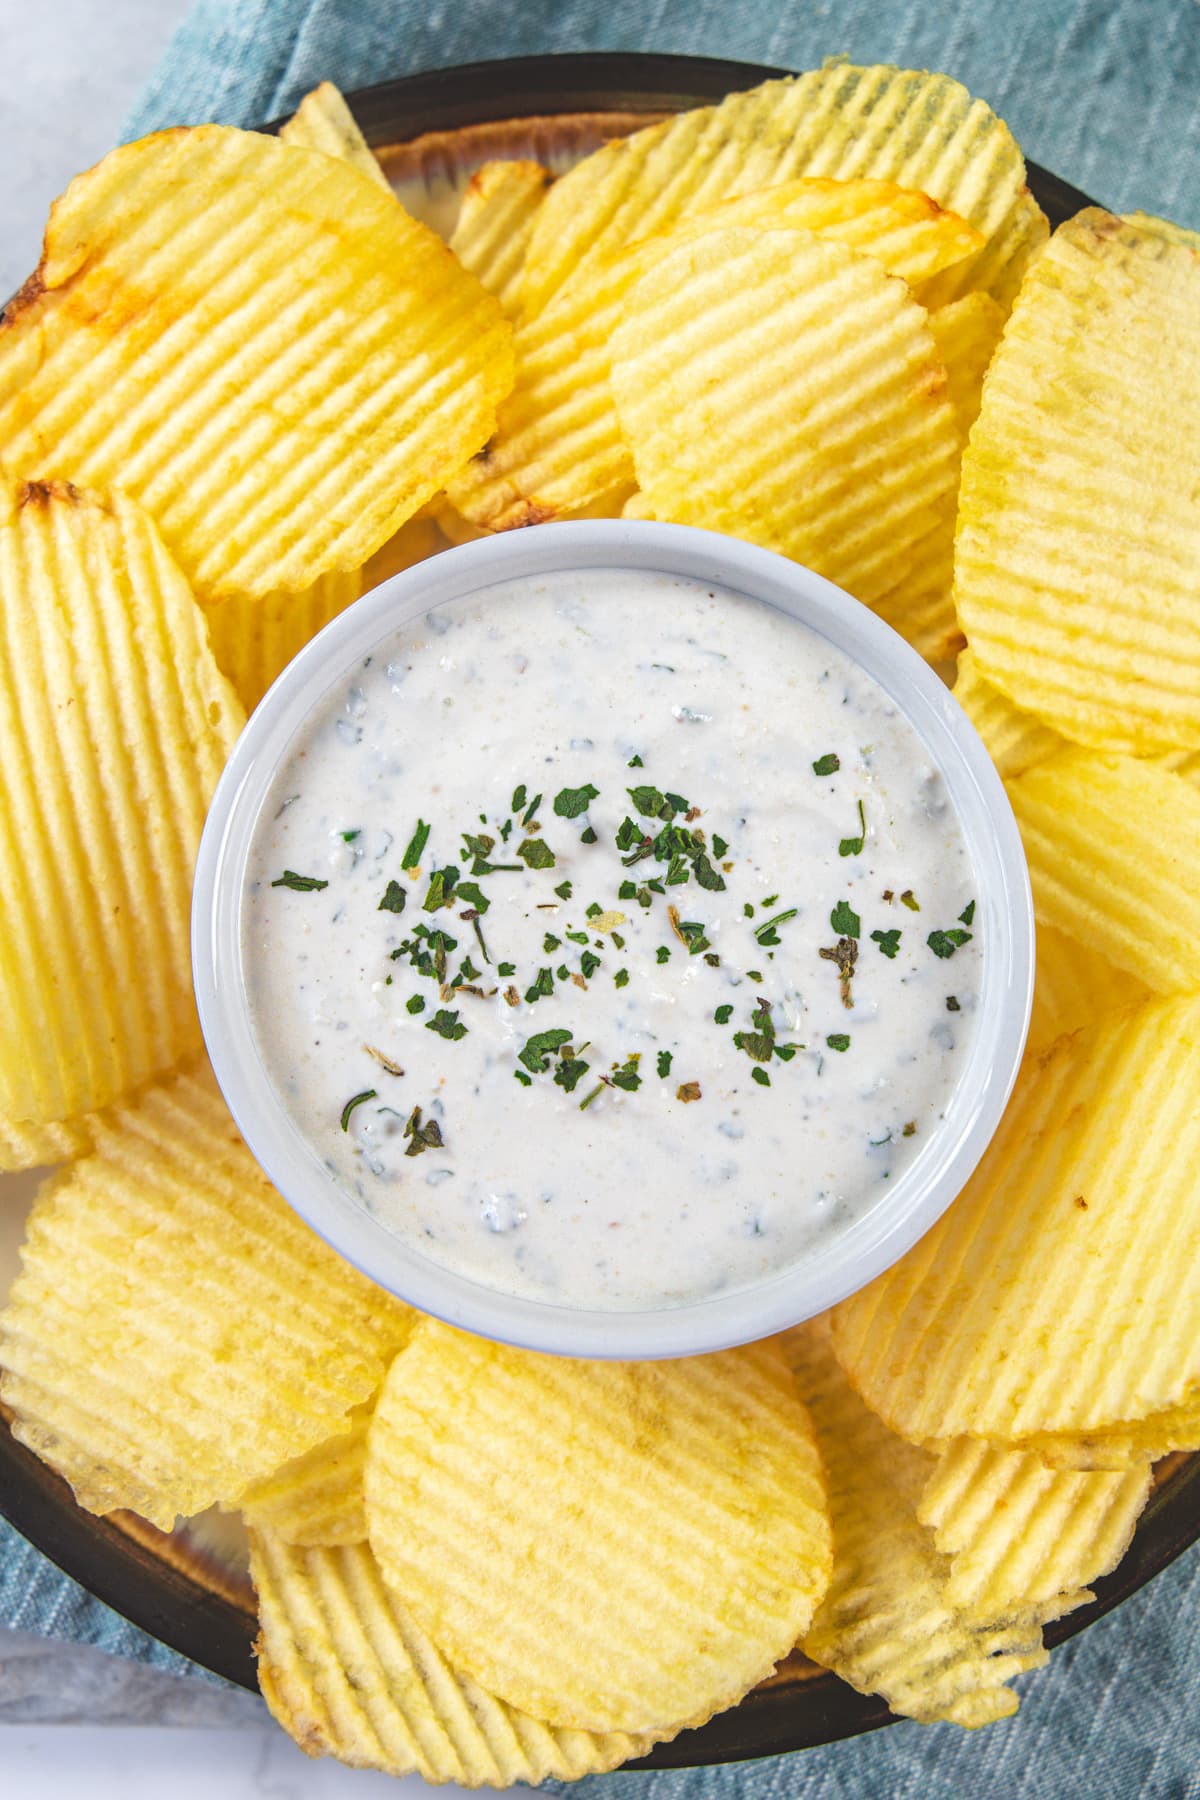 Sour cream dip garnished with dried herbs and served with potato chips.